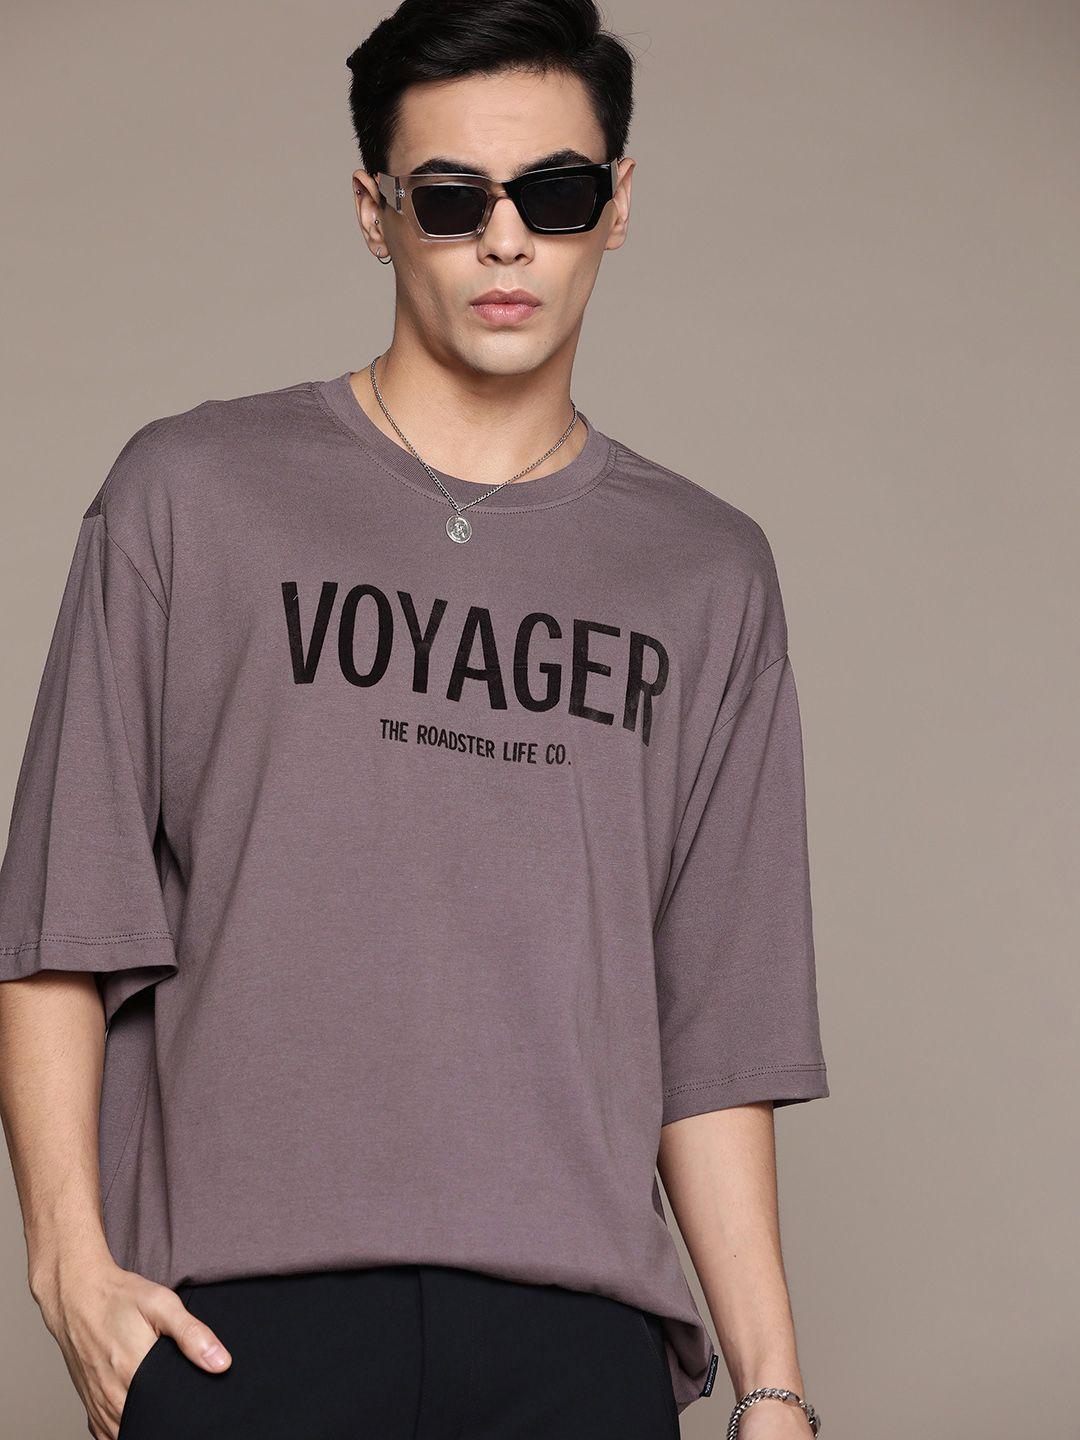 the roadster lifestyle co. embossed print pure cotton oversized t-shirt